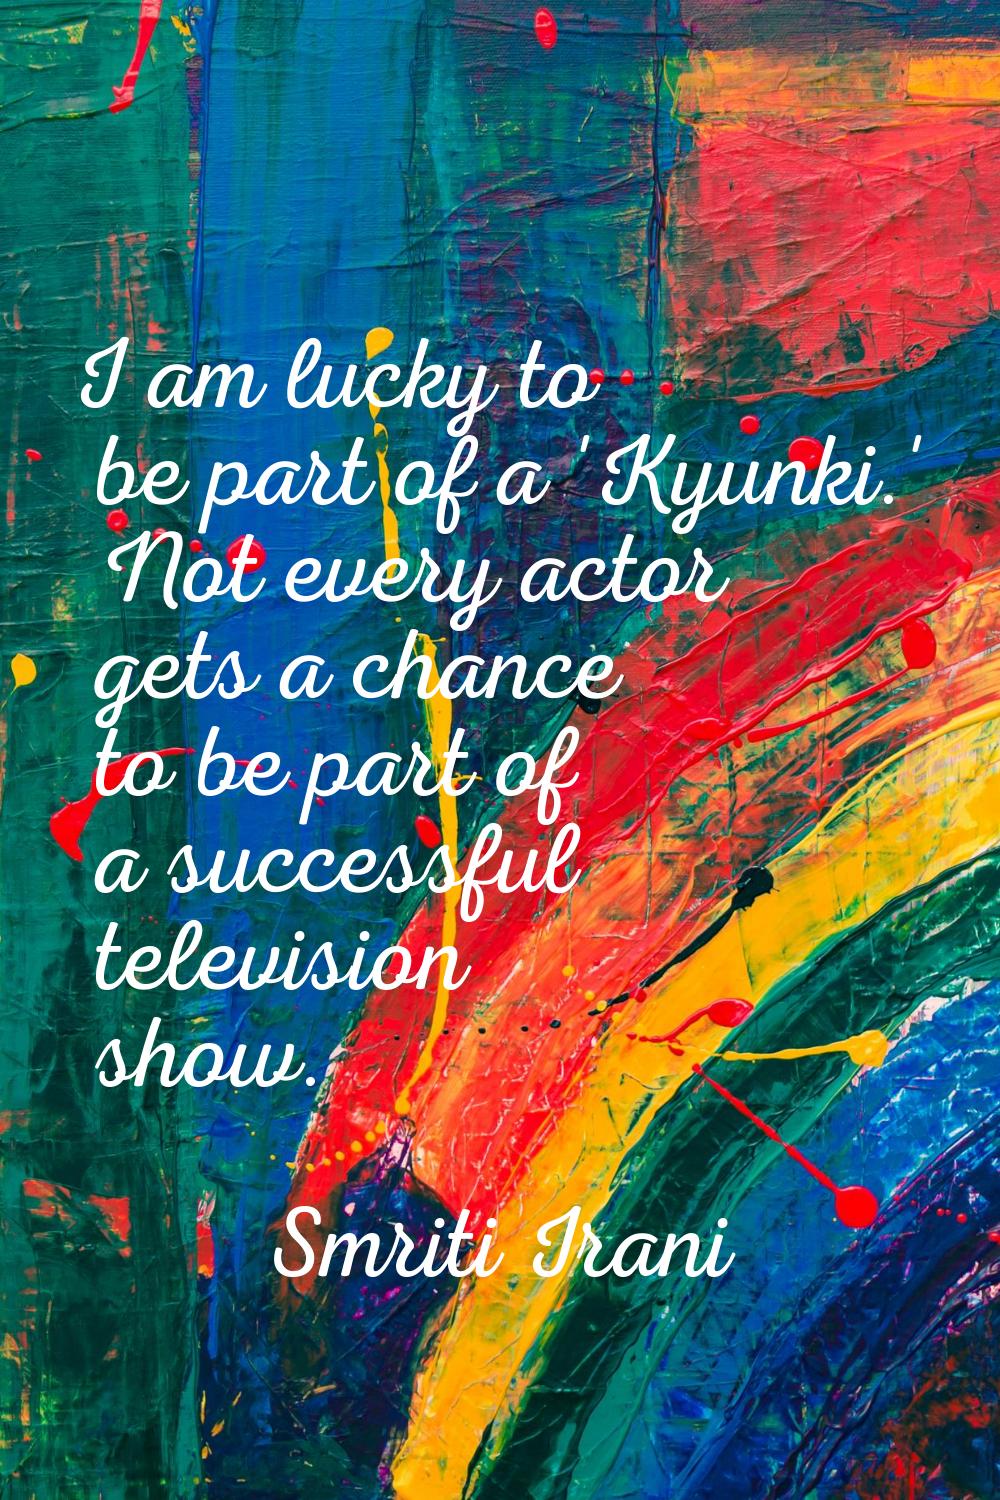 I am lucky to be part of a 'Kyunki.' Not every actor gets a chance to be part of a successful telev